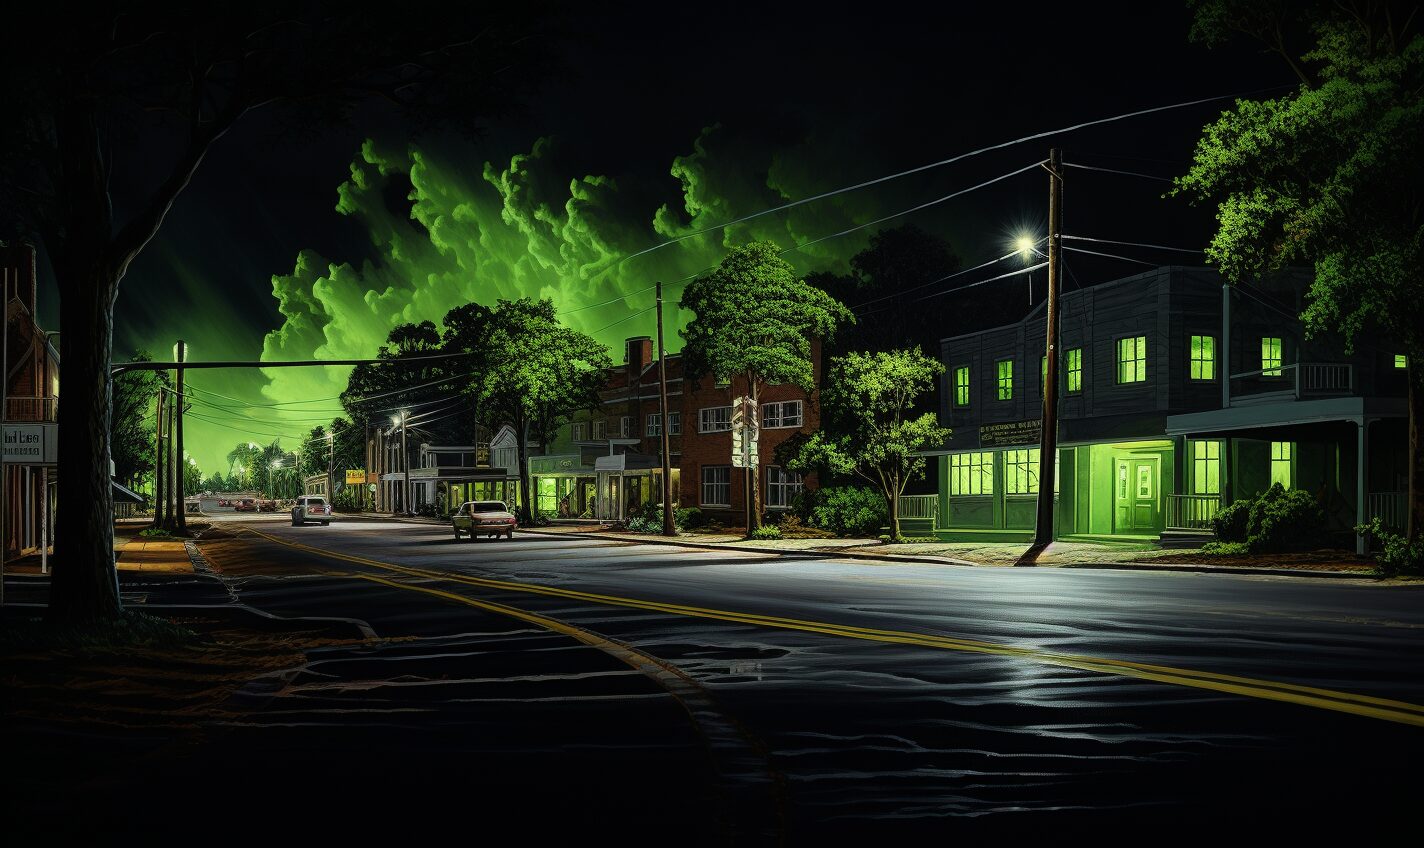 mobile, alabama in a black and neon green glow